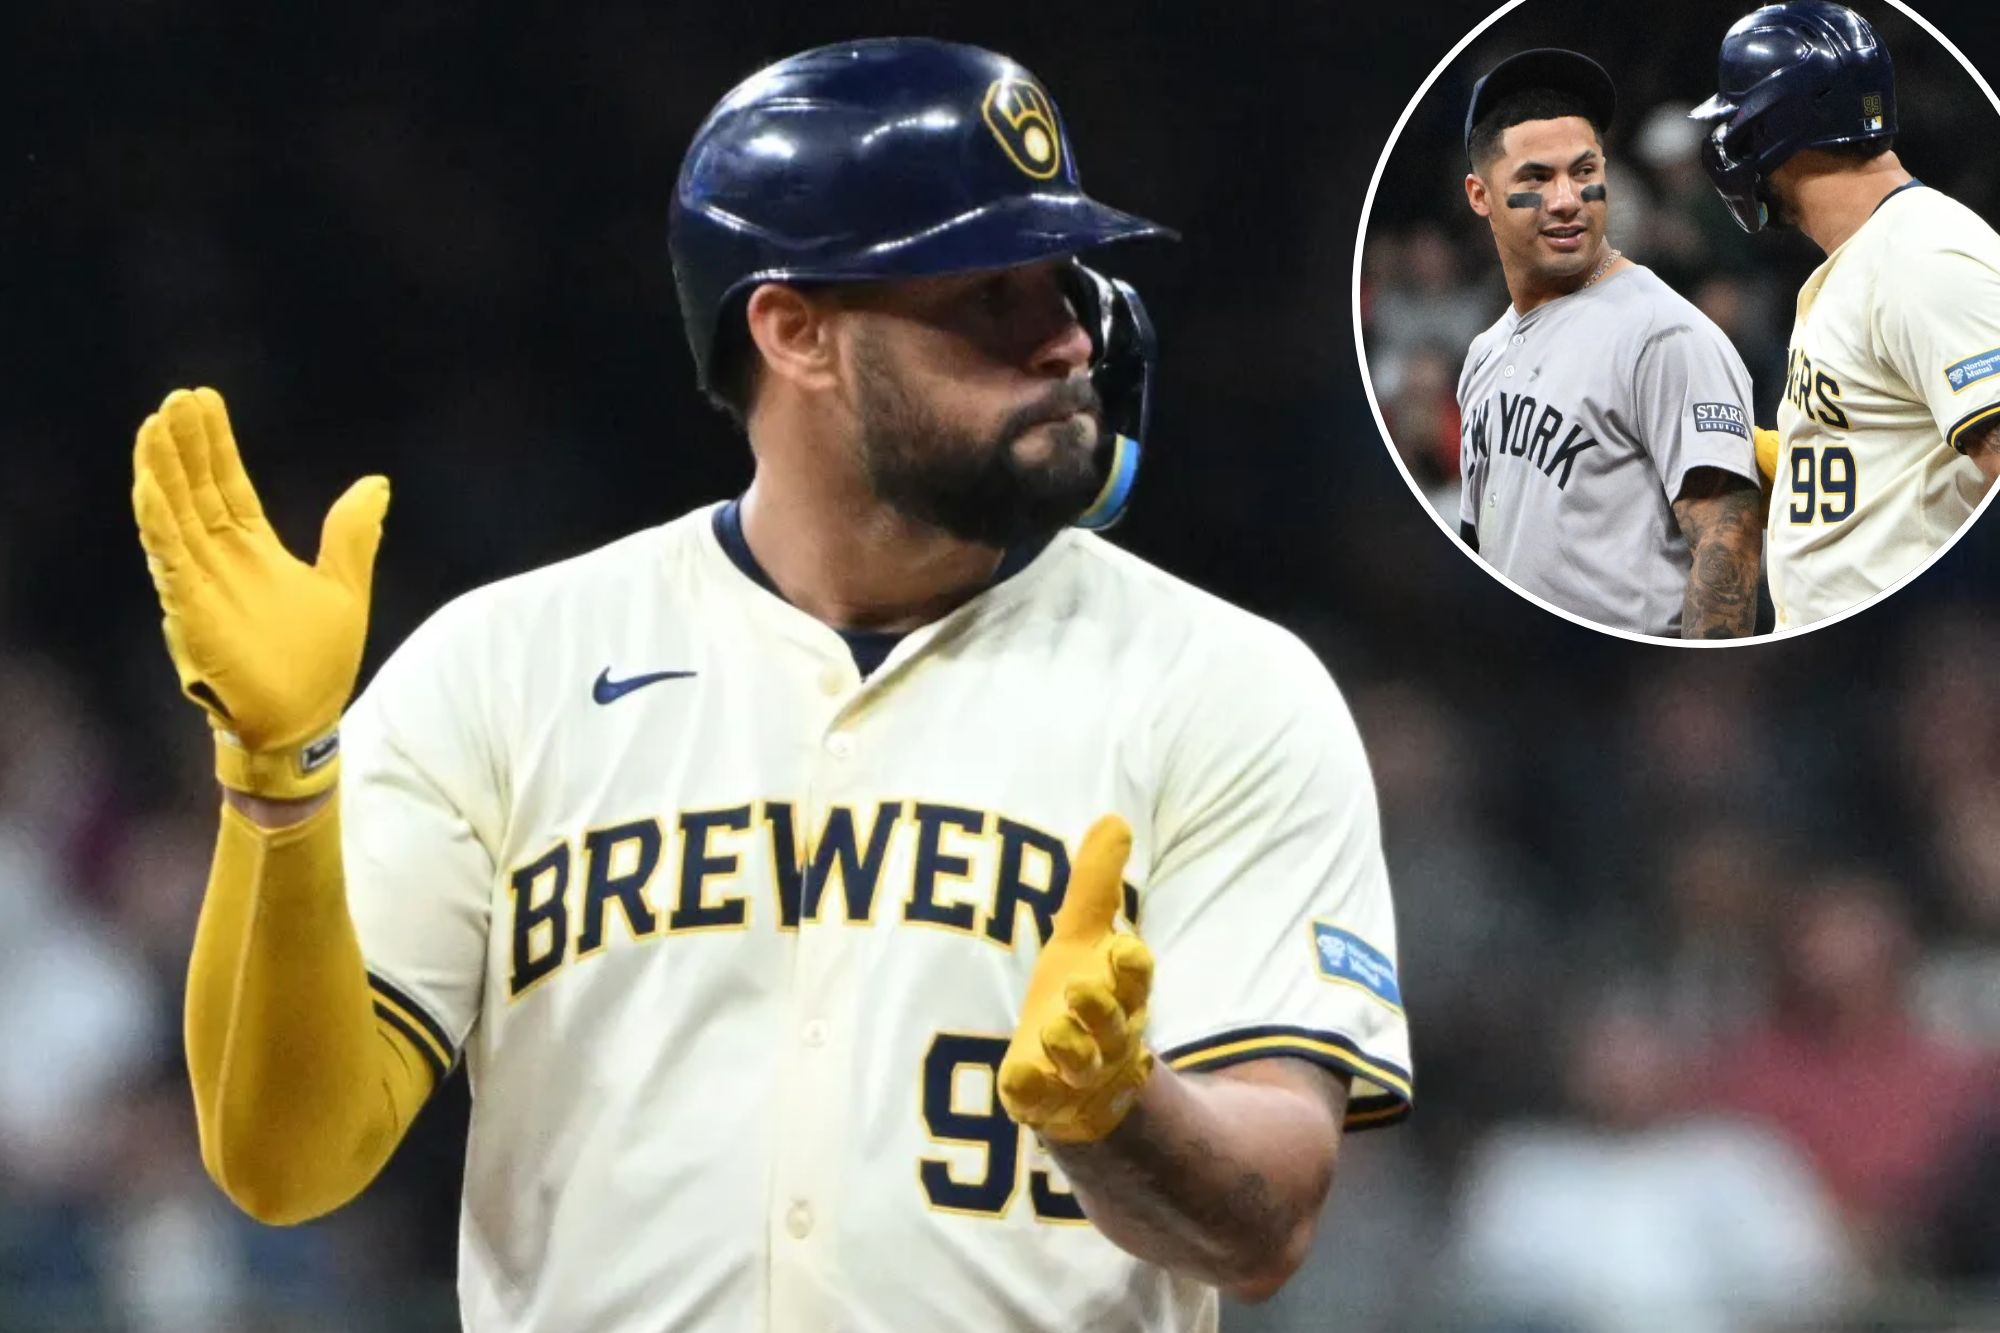 Gary Sanchez, celebrating after hitting a double, (inset) talks with former teammate Gleyber Torres during a pitching change in the sixth inning of the Brewers' extra-inning win on the Yankees on Friday.